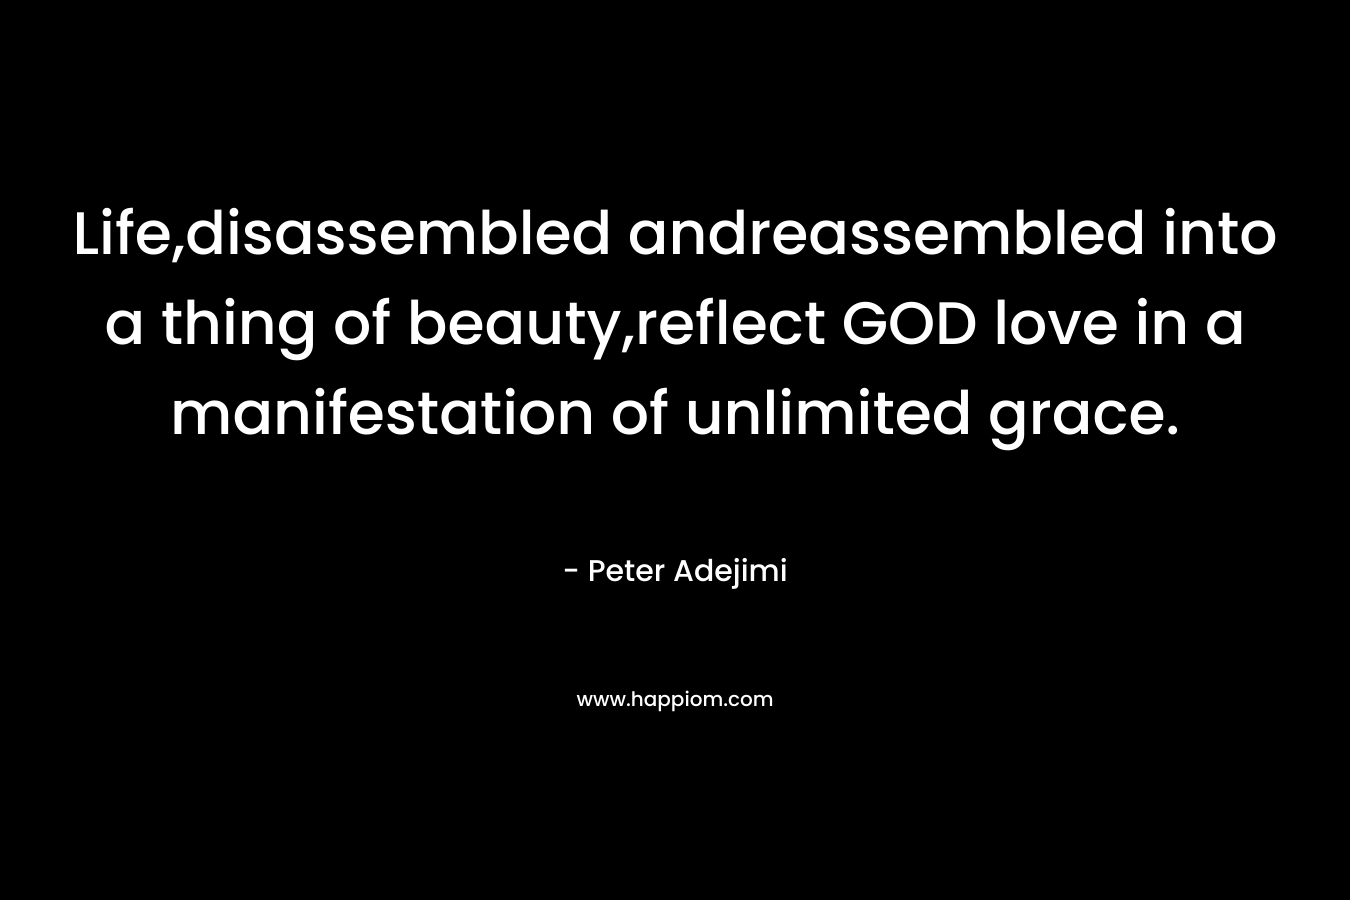 Life,disassembled andreassembled into a thing of beauty,reflect GOD love in a manifestation of unlimited grace. – Peter Adejimi